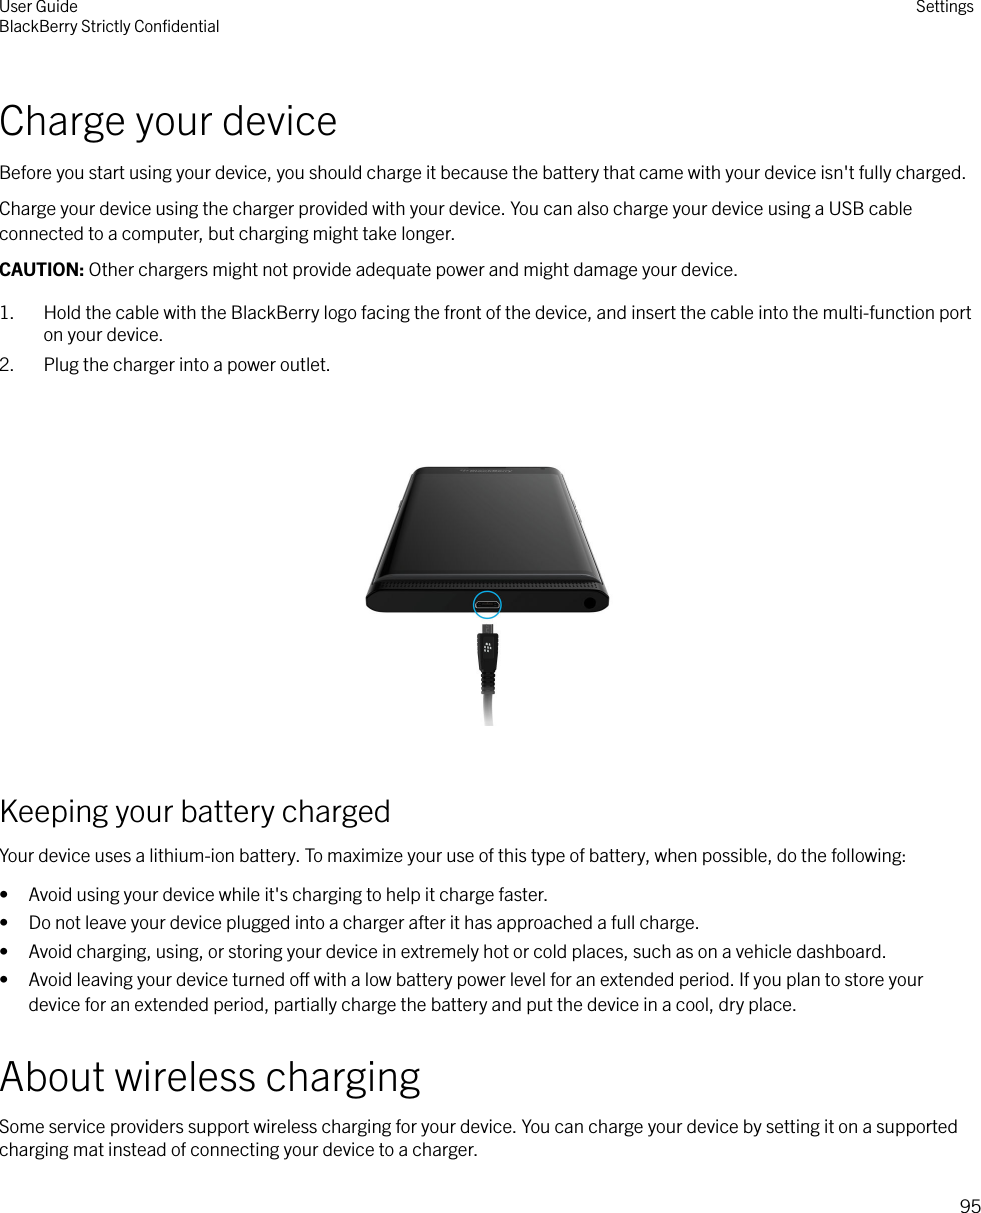 Charge your deviceBefore you start using your device, you should charge it because the battery that came with your device isn&apos;t fully charged.Charge your device using the charger provided with your device. You can also charge your device using a USB cableconnected to a computer, but charging might take longer.CAUTION: Other chargers might not provide adequate power and might damage your device.1. Hold the cable with the BlackBerry logo facing the front of the device, and insert the cable into the multi-function porton your device.2. Plug the charger into a power outlet.  Keeping your battery chargedYour device uses a lithium-ion battery. To maximize your use of this type of battery, when possible, do the following:• Avoid using your device while it&apos;s charging to help it charge faster.• Do not leave your device plugged into a charger after it has approached a full charge.• Avoid charging, using, or storing your device in extremely hot or cold places, such as on a vehicle dashboard.• Avoid leaving your device turned o with a low battery power level for an extended period. If you plan to store yourdevice for an extended period, partially charge the battery and put the device in a cool, dry place.About wireless chargingSome service providers support wireless charging for your device. You can charge your device by setting it on a supportedcharging mat instead of connecting your device to a charger.User GuideBlackBerry Strictly ConﬁdentialSettings95